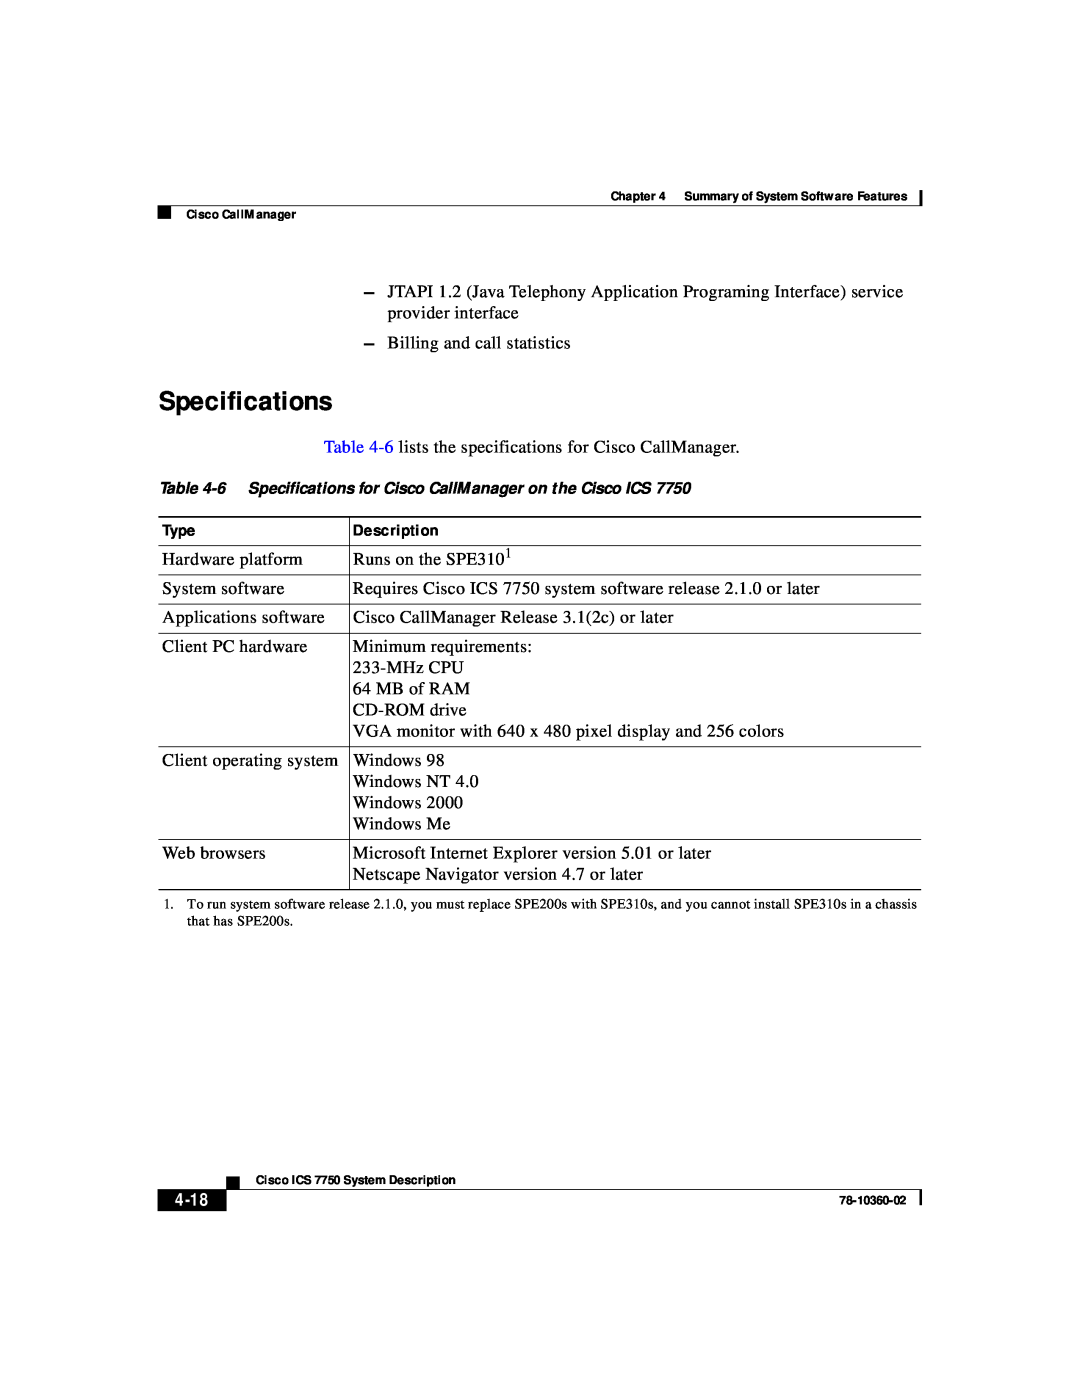 Cisco Systems ICS-7750 manual 4-18, 6 Specifications for Cisco CallManager on the Cisco ICS 